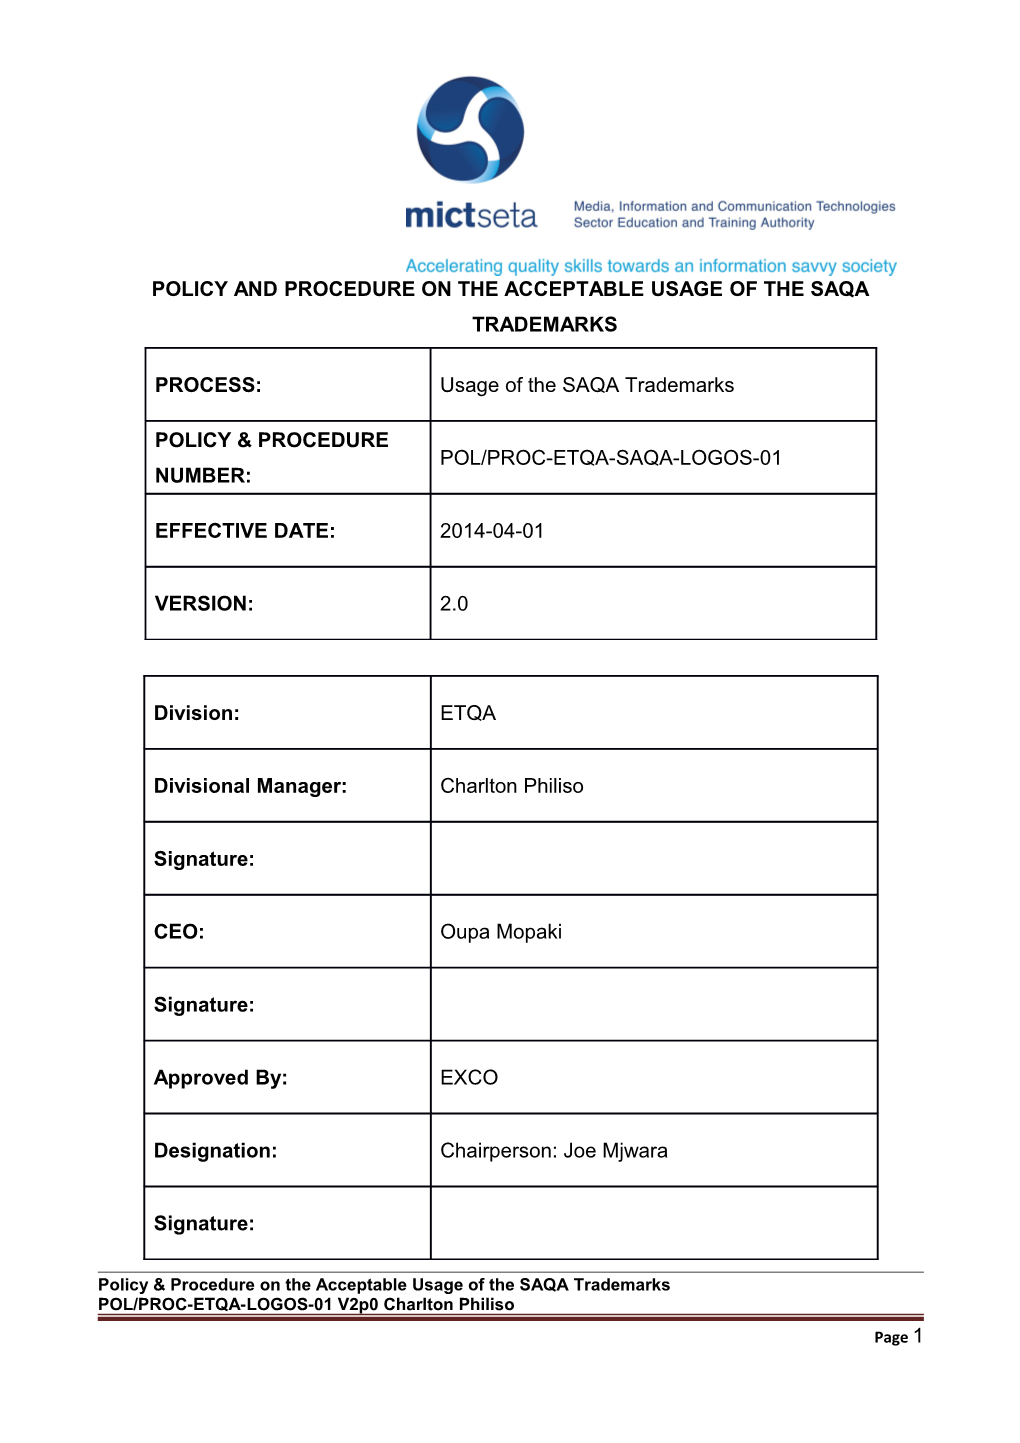 Policy and Procedures on the Acceptable Usage of the Saqa Trademarks and Holograms